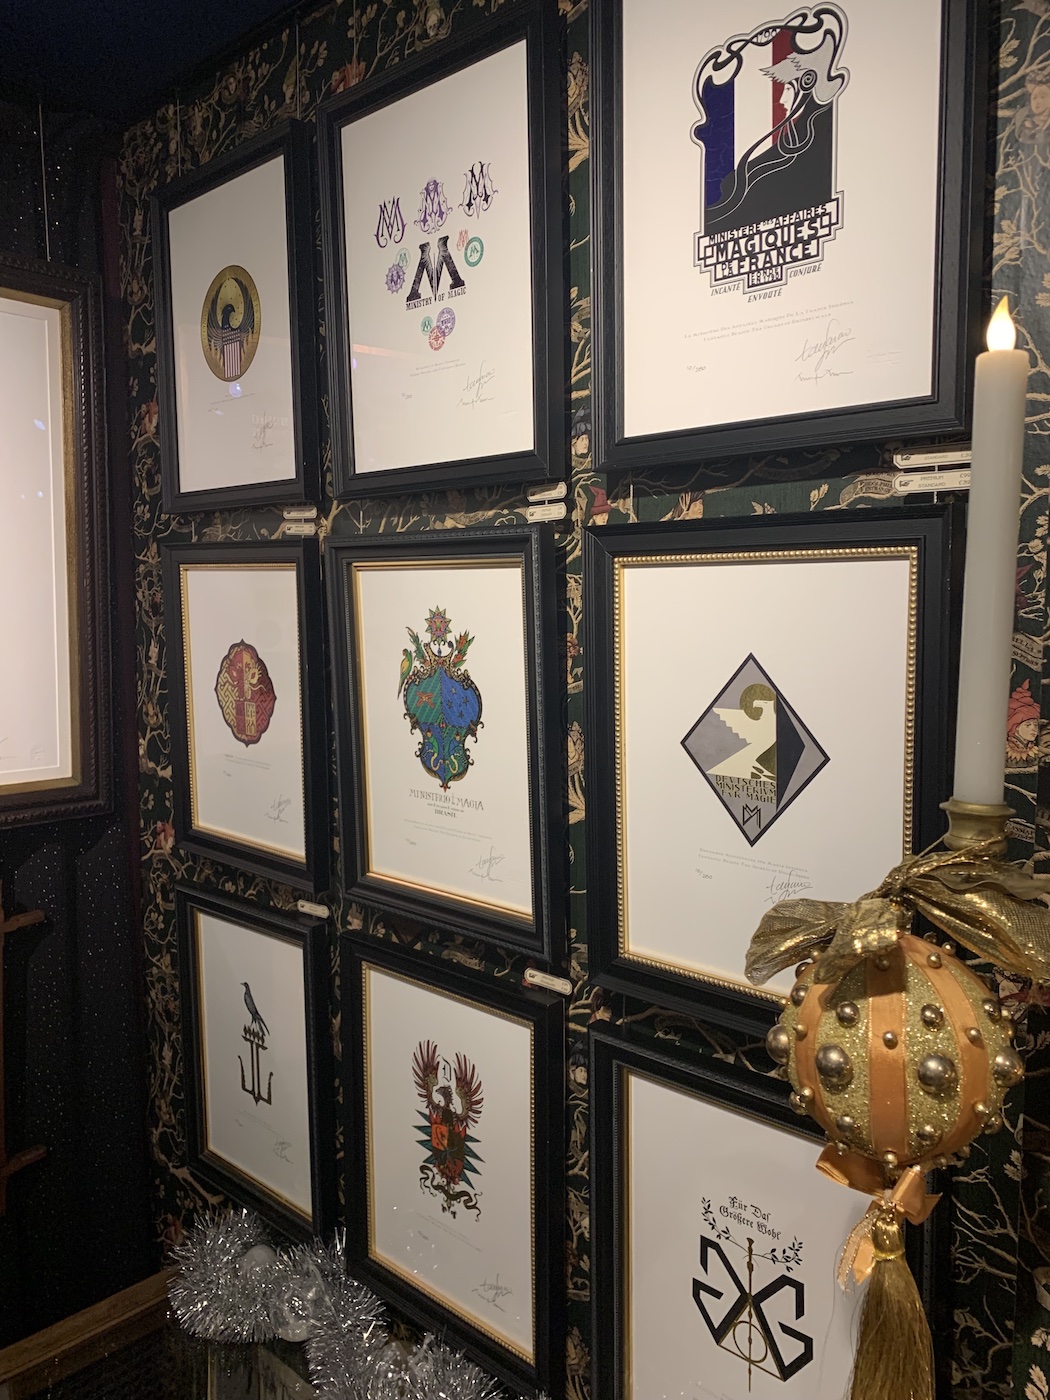 International Ministry of Magic crests line up uniformly on the wall at the House of MinaLima.